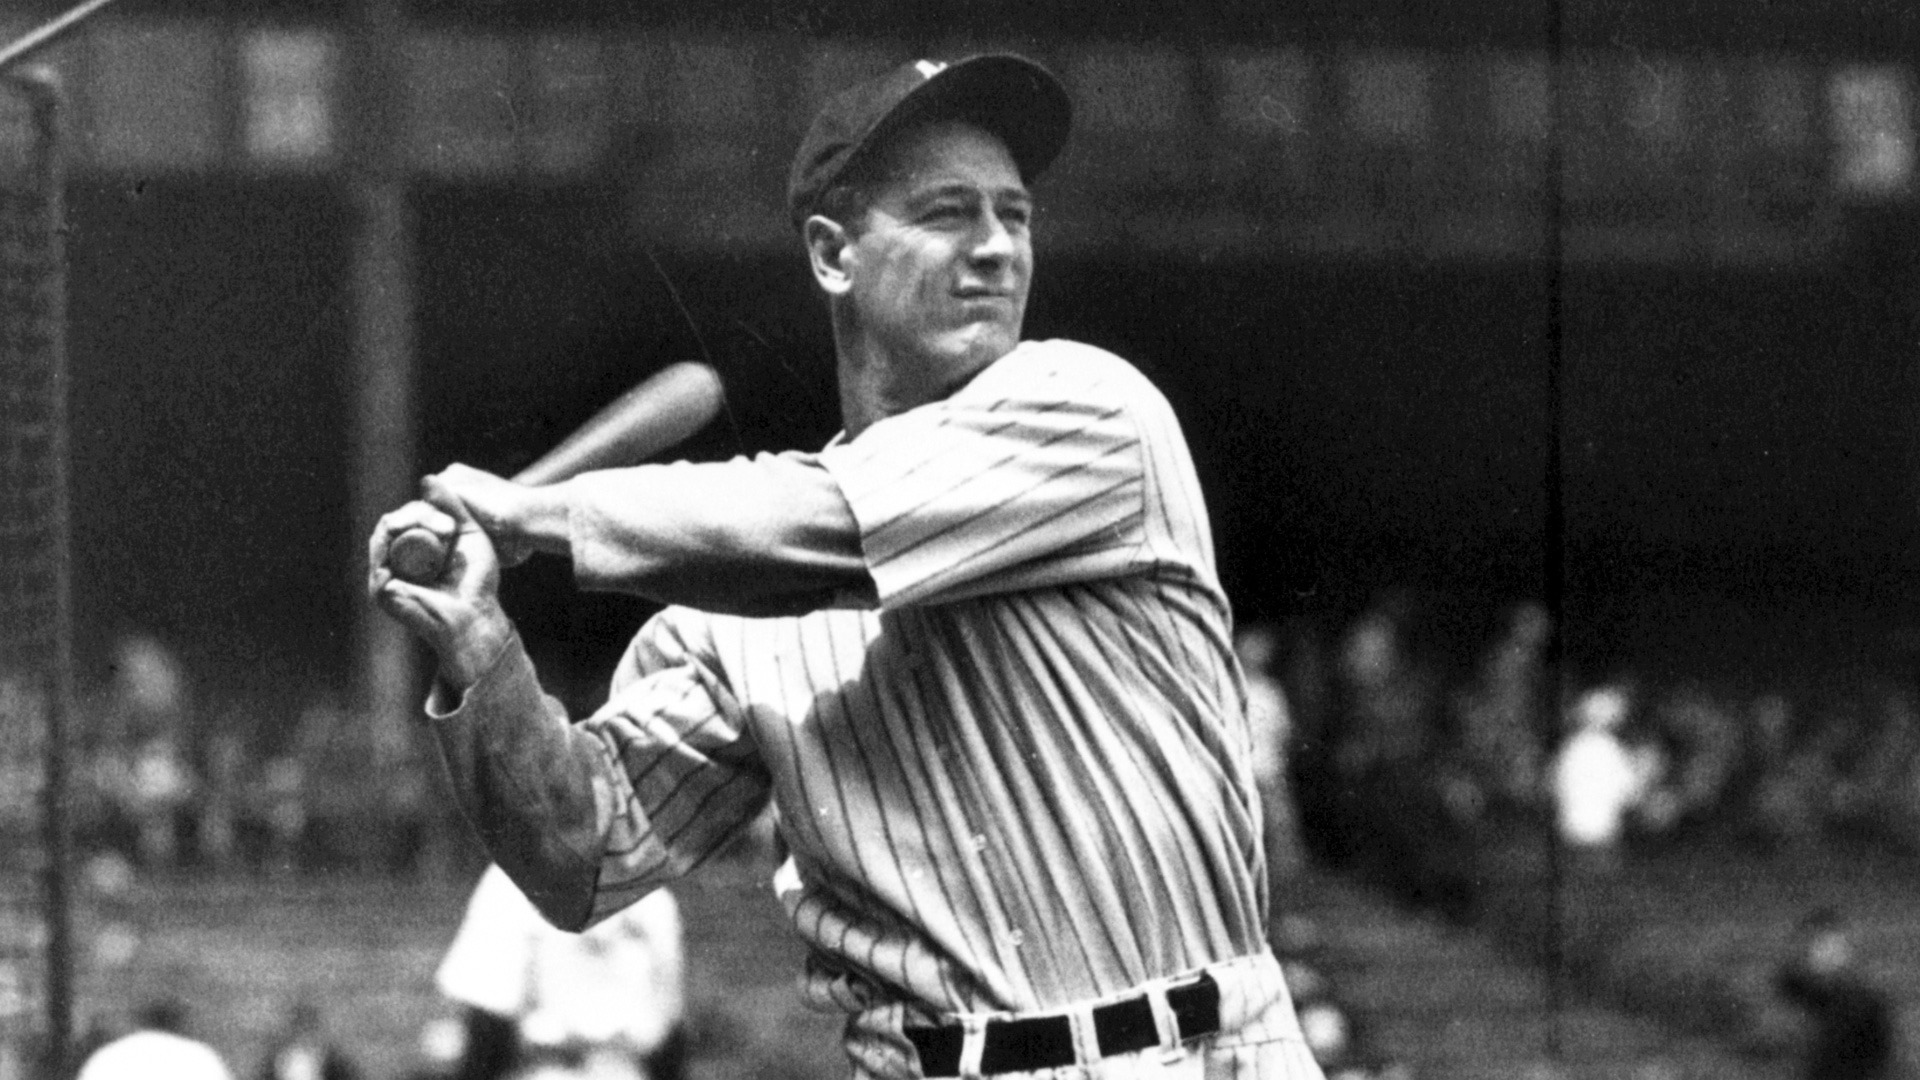 Today in 1938, Lou Gehrig played in his 2,000th consecutive game and collec...